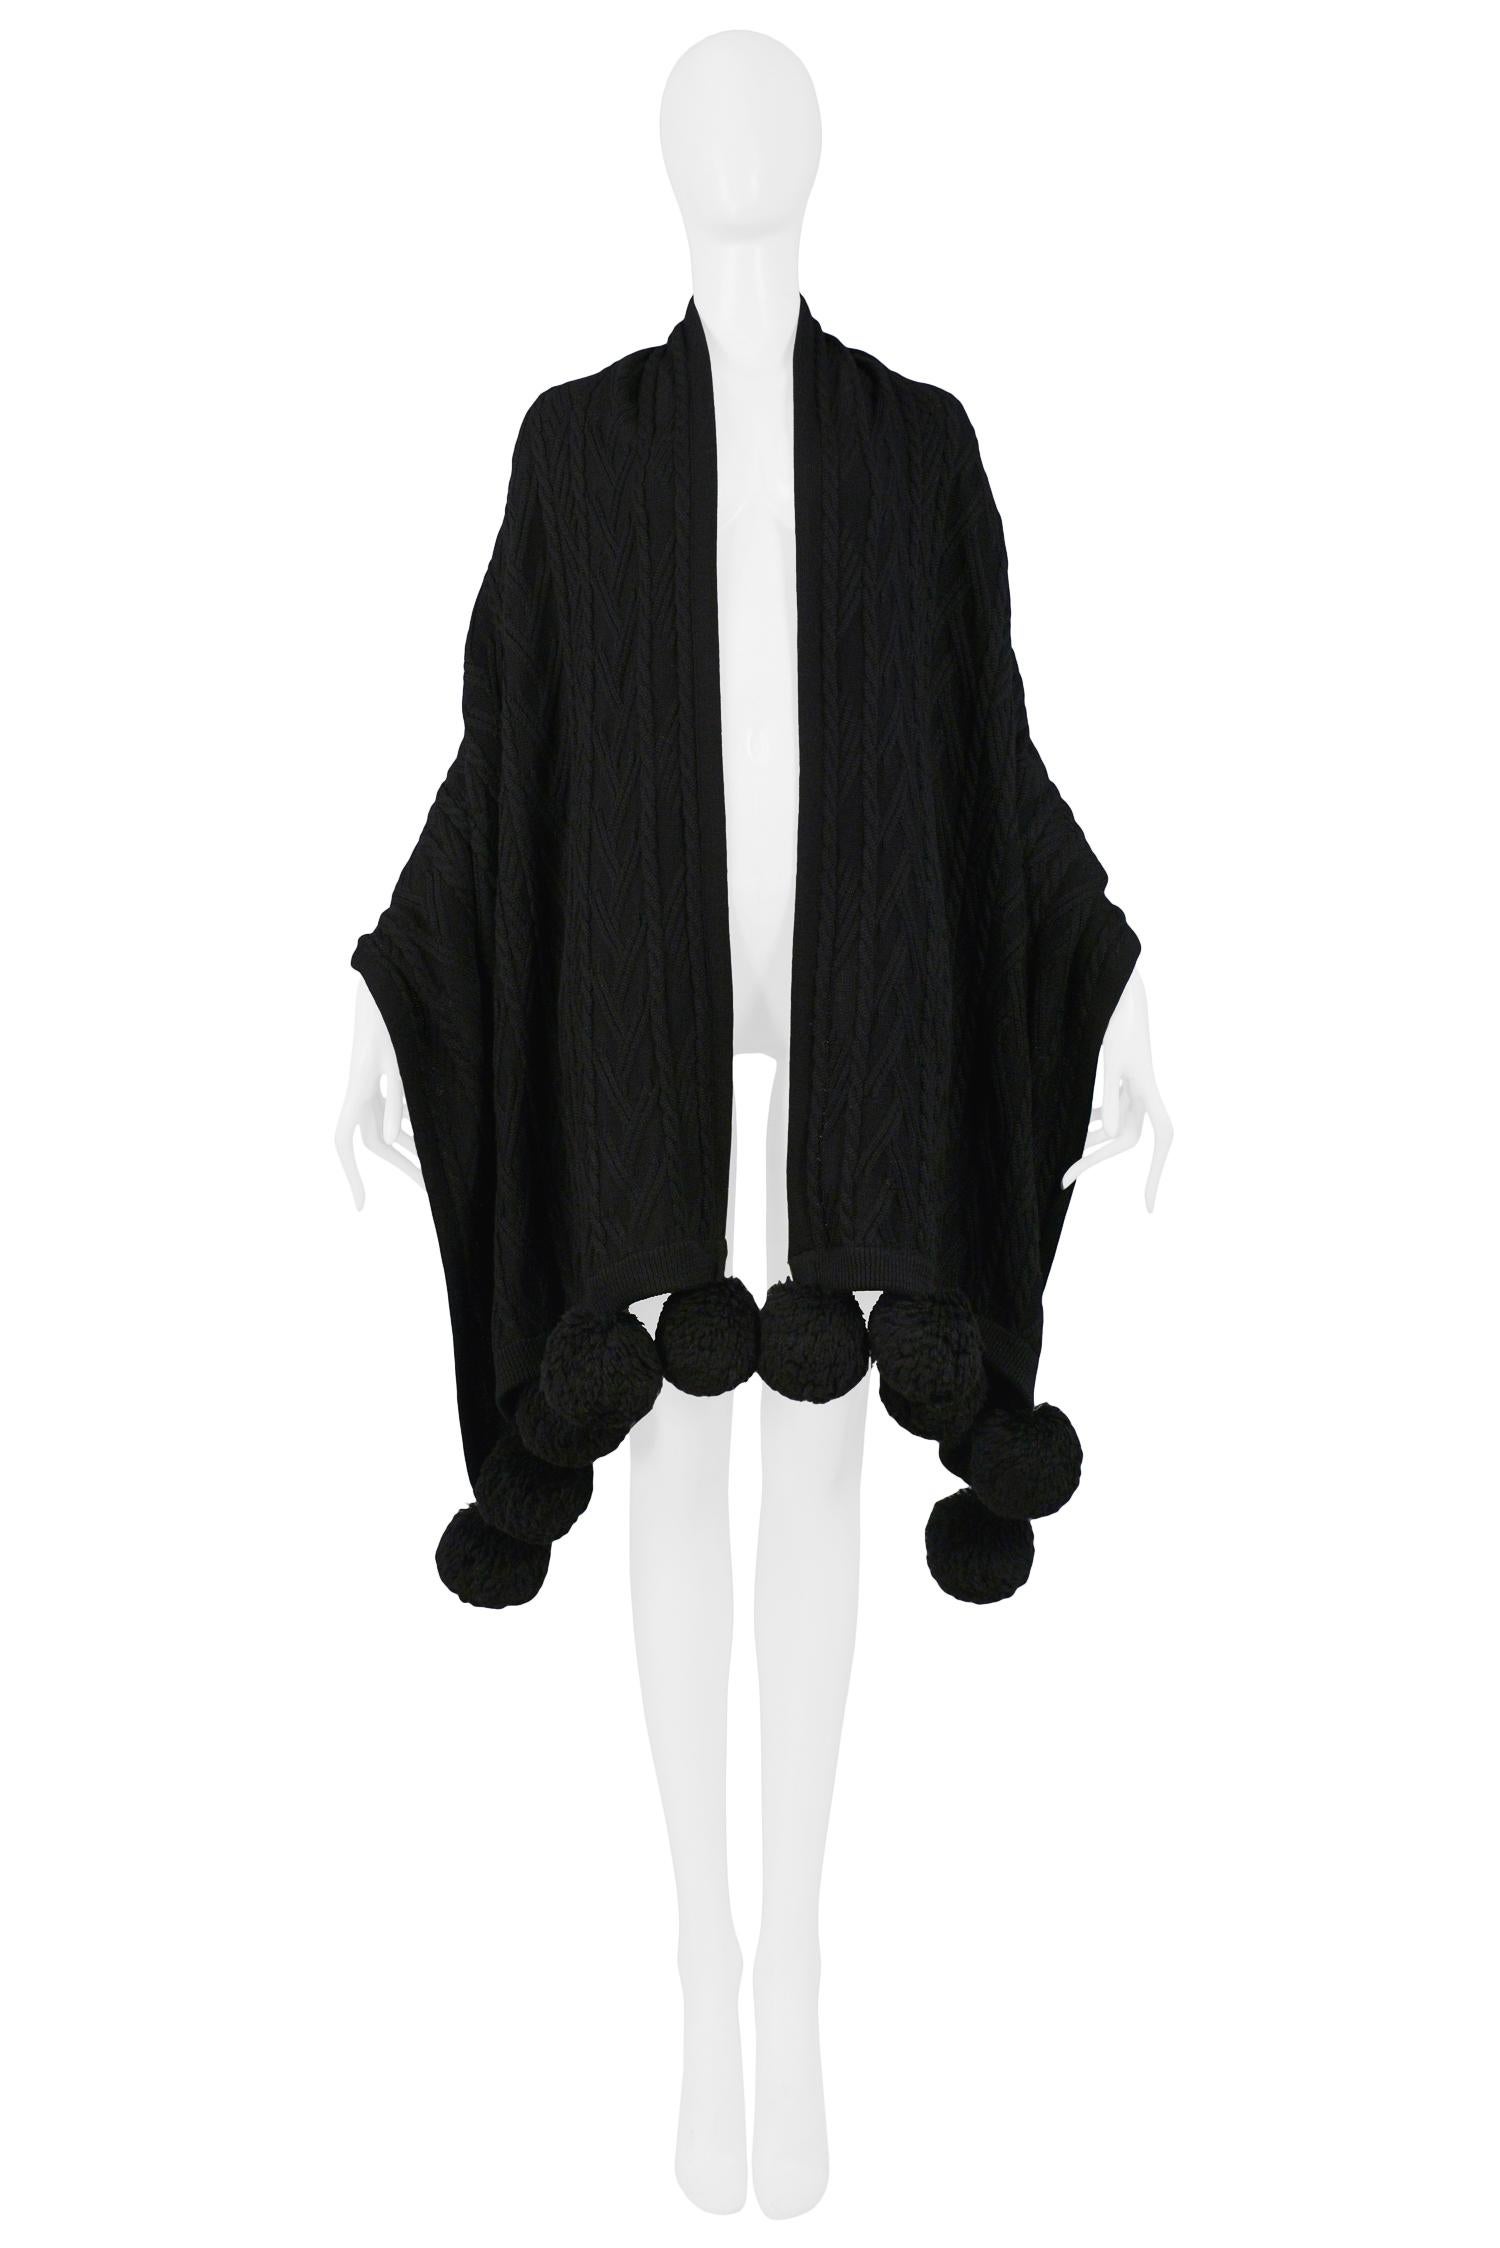 Vintage Yves Saint Laurent black wool cable knit shawl edged with large pom poms.

Excellent Condition.
